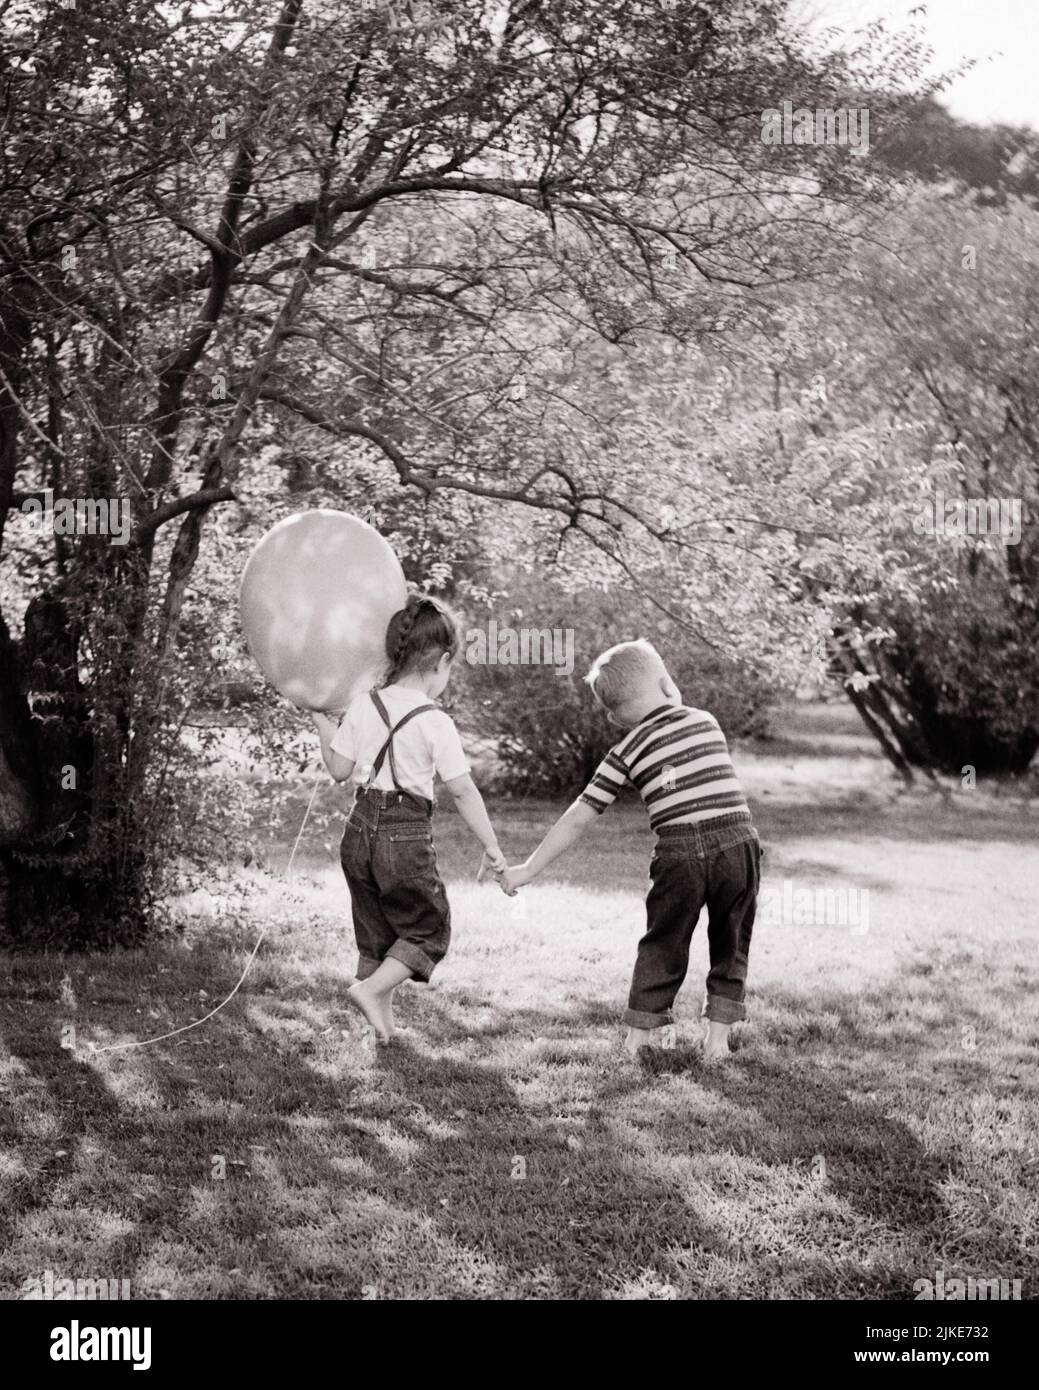 1960s LITTLE BOY AND GIRL HOLDING HANDS WALKING IN GRASS GIRL BAREFOOT HOLDING A BALLOON BOTH WEARING BLUE JEANS TEE SHIRTS - j13216 HAR001 HARS JOY LIFESTYLE FEMALES BROTHERS NATURE TEE COPY SPACE FRIENDSHIP FULL-LENGTH PERSONS MALES SIBLINGS DENIM SISTERS B&W SUMMERTIME HIGH ANGLE ADVENTURE AND SHIRTS BAREFOOT SIBLING CONNECTION FRIENDLY BLUE JEANS COOPERATION GROWTH INFORMAL JUVENILES SEASON TOGETHERNESS TWILL BLACK AND WHITE CASUAL CAUCASIAN ETHNICITY HAR001 OLD FASHIONED Stock Photo